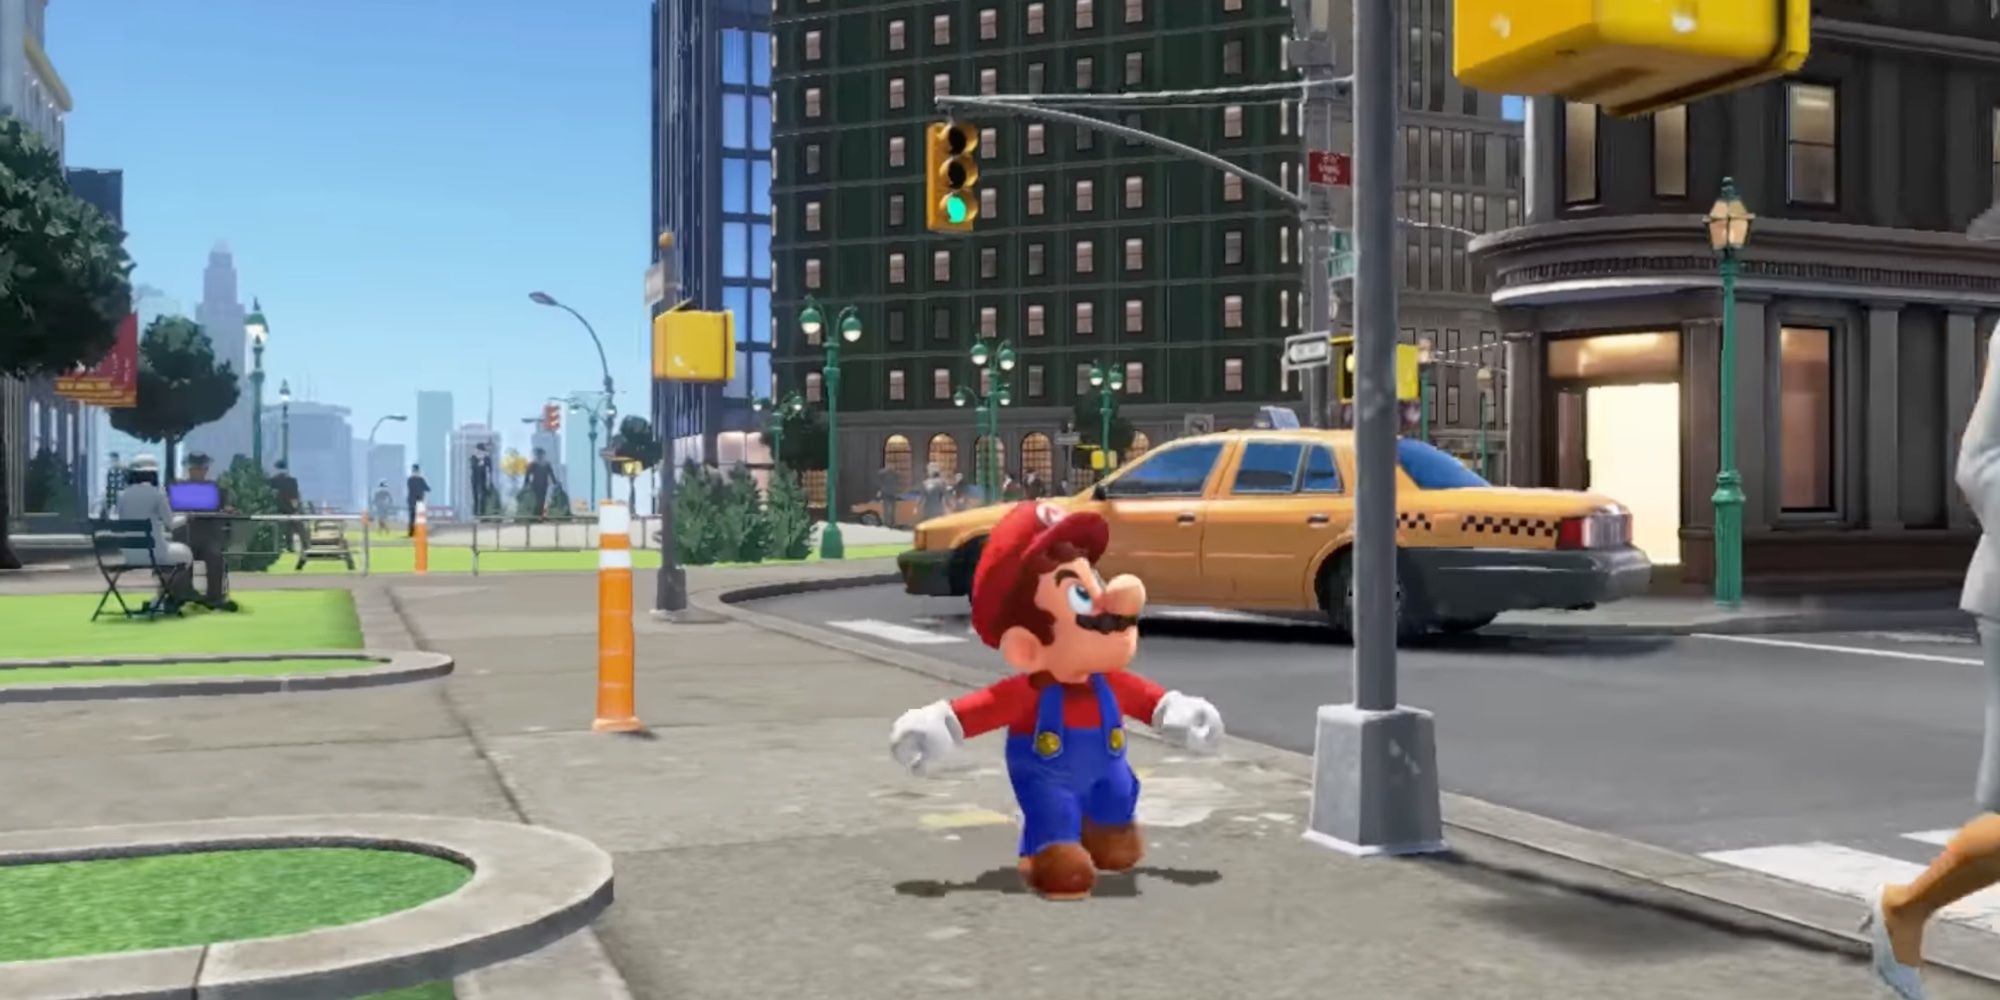 Super Mario Odyssey: Mario running around in a big city as seen in the game's trailer 